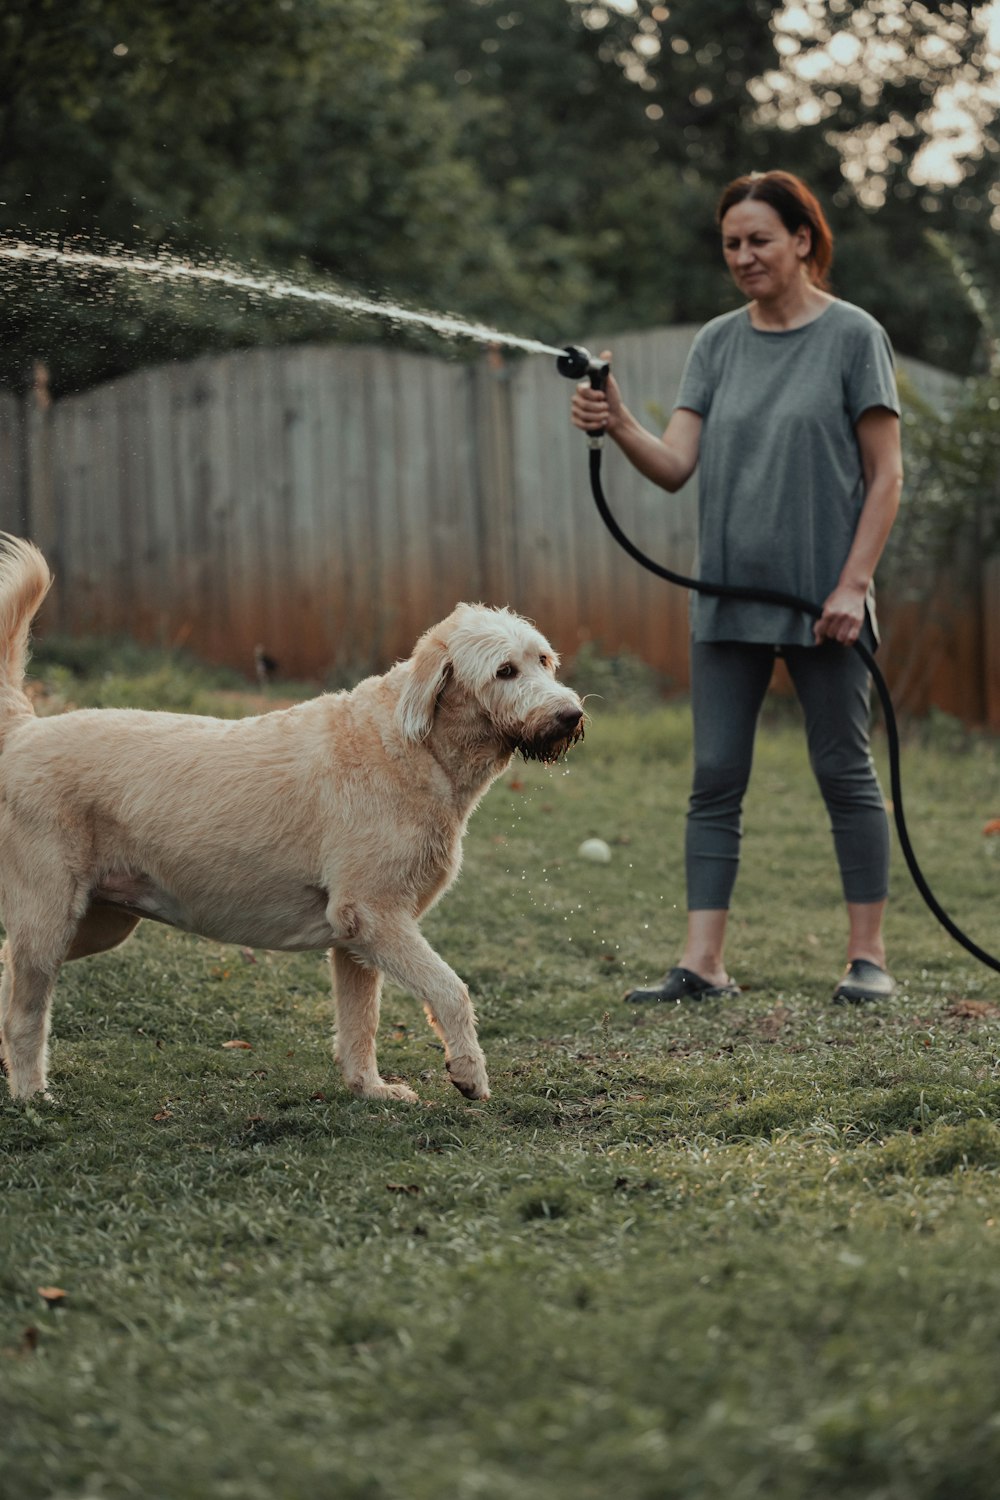 a woman is spraying a dog with a hose